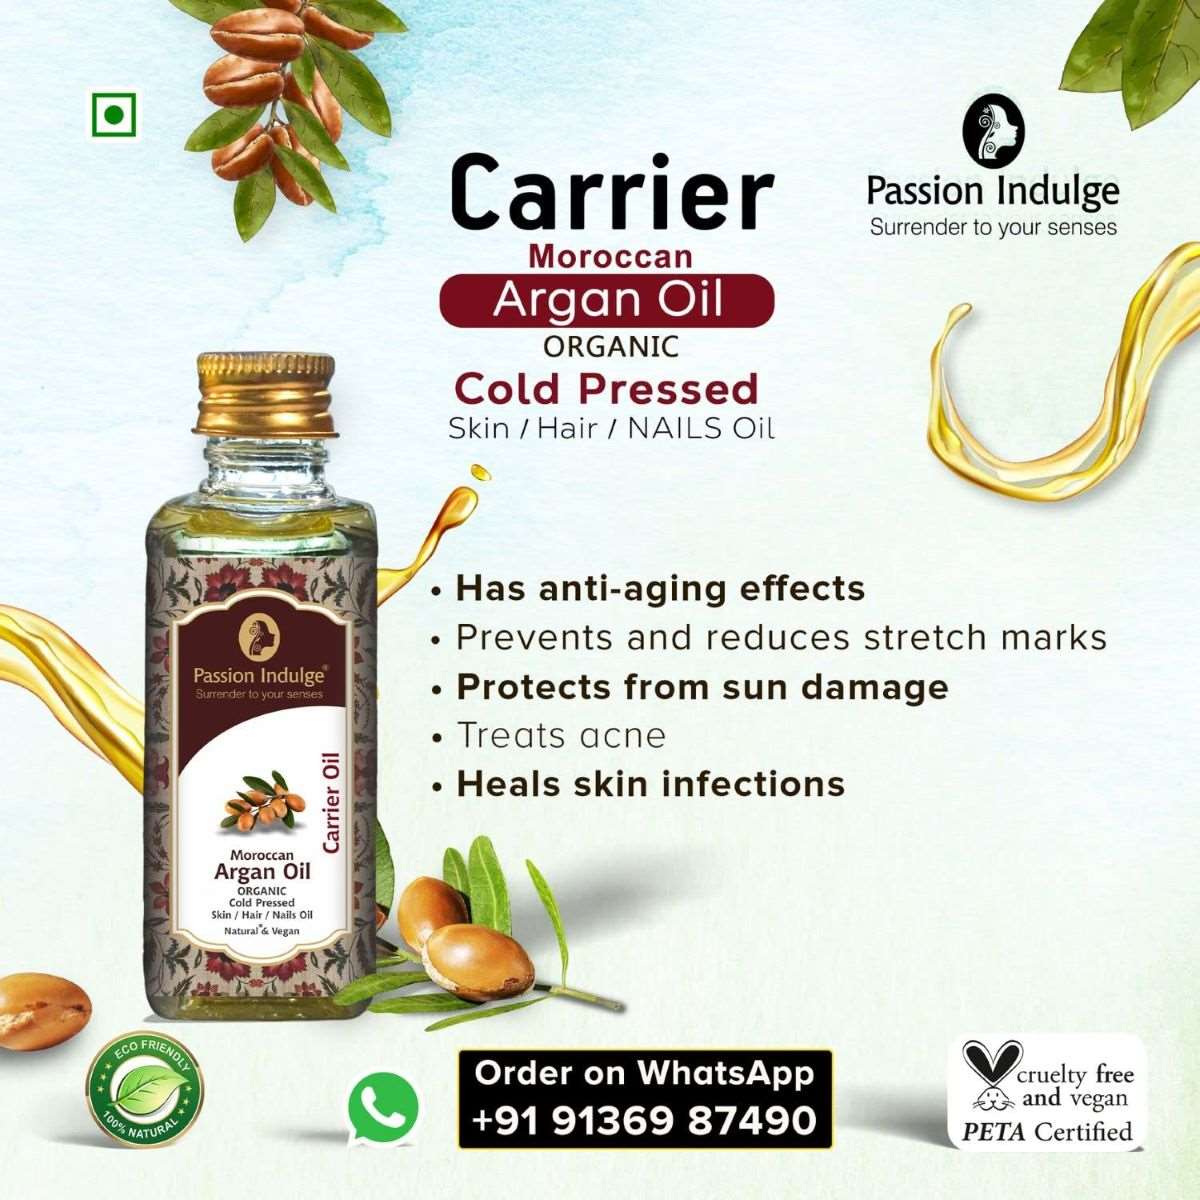 Moroccan Argan Carrier Oil 60ml for Hair Growth | Reduces Hair Loss | Dandruff and Scalp Disorders | Help Prevent Hair Thinning | Natural & Vegan